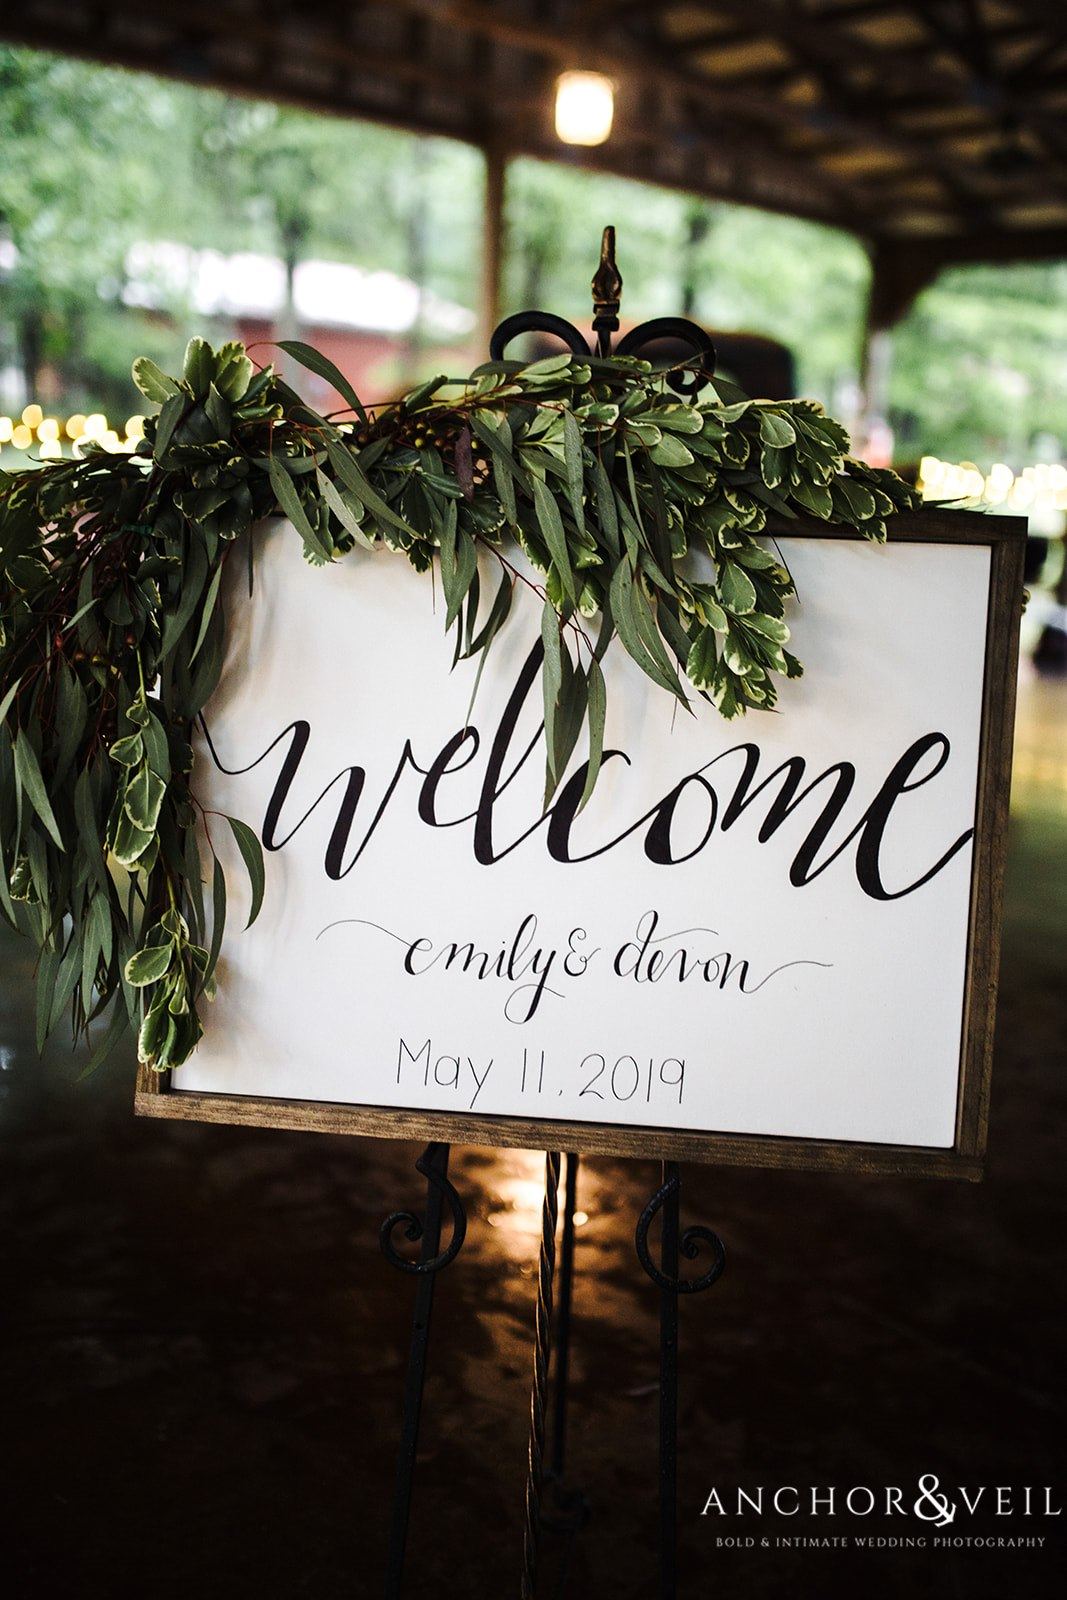 The "Welcome" to the ceremony sign at The Farm at Brusharbor Wedding